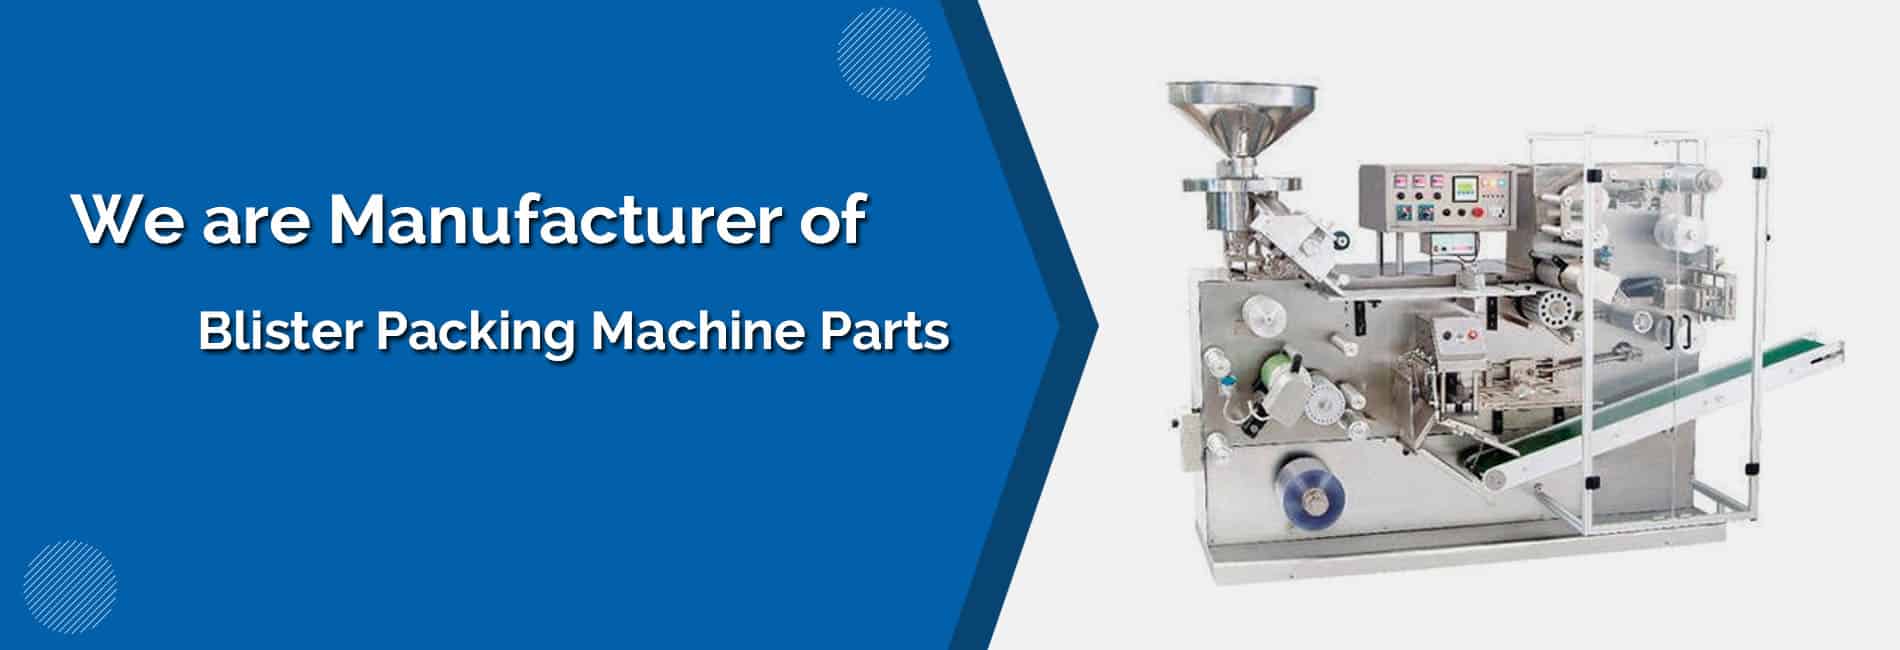 Blister Packing Machine Parts in Ahmedabad